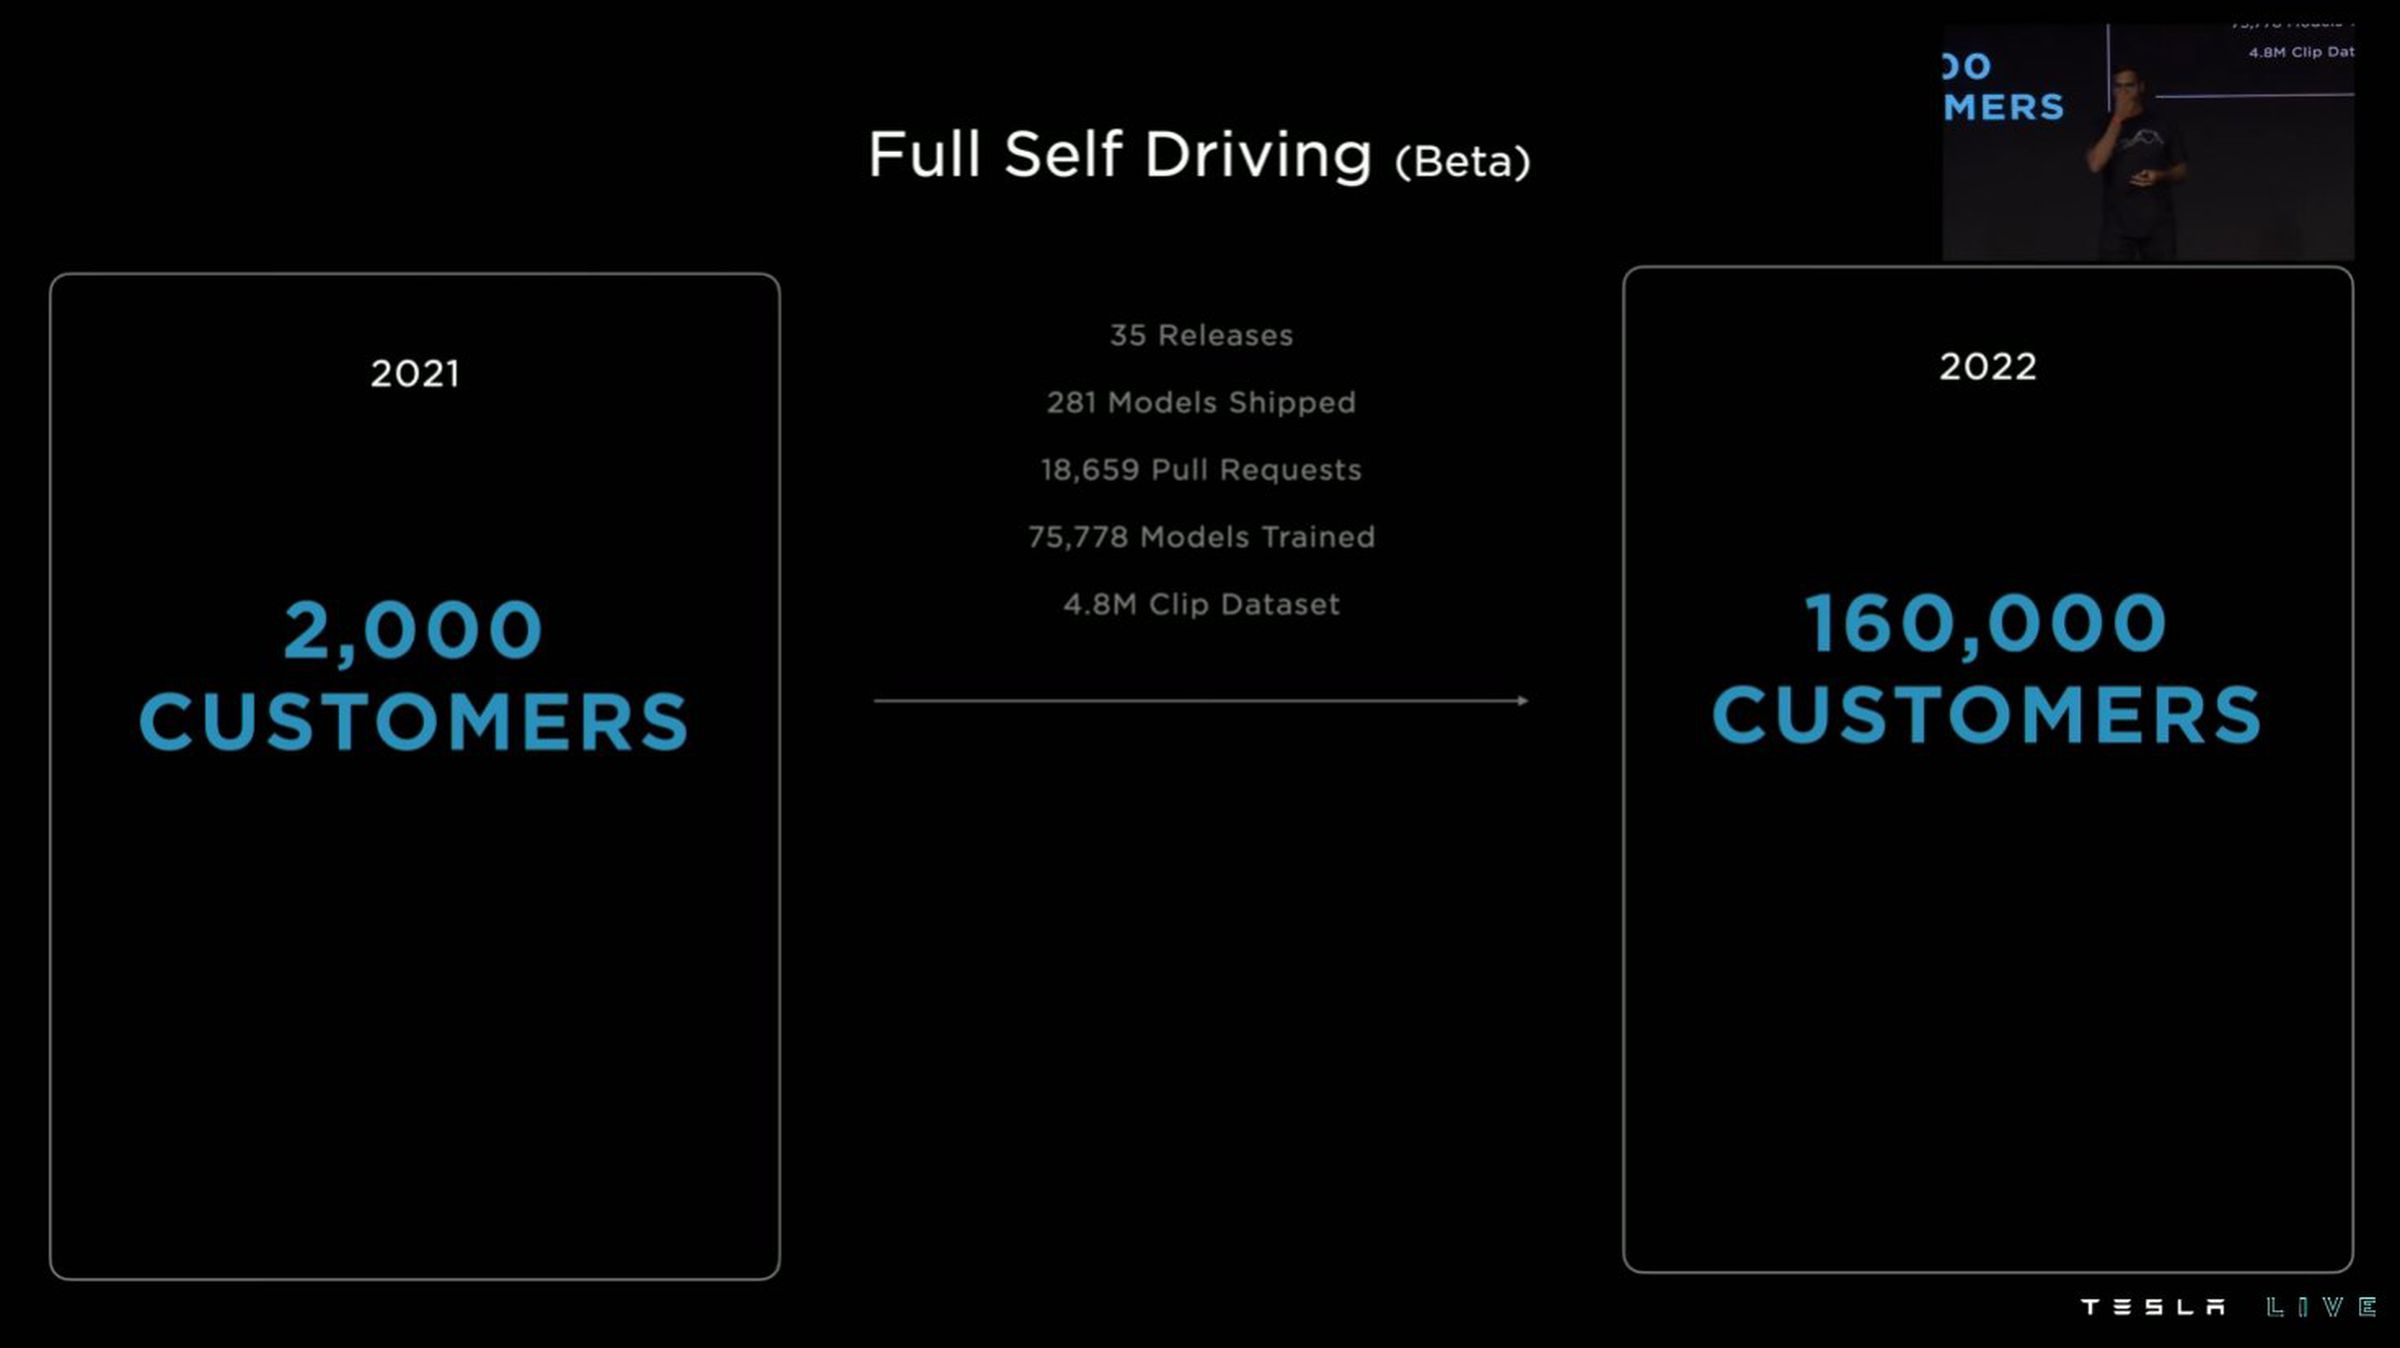 Tesla lists progress of its “Full Self Driving (Beta)” project from 2,000 customers in 2021 to 160,000 customers in 2022.